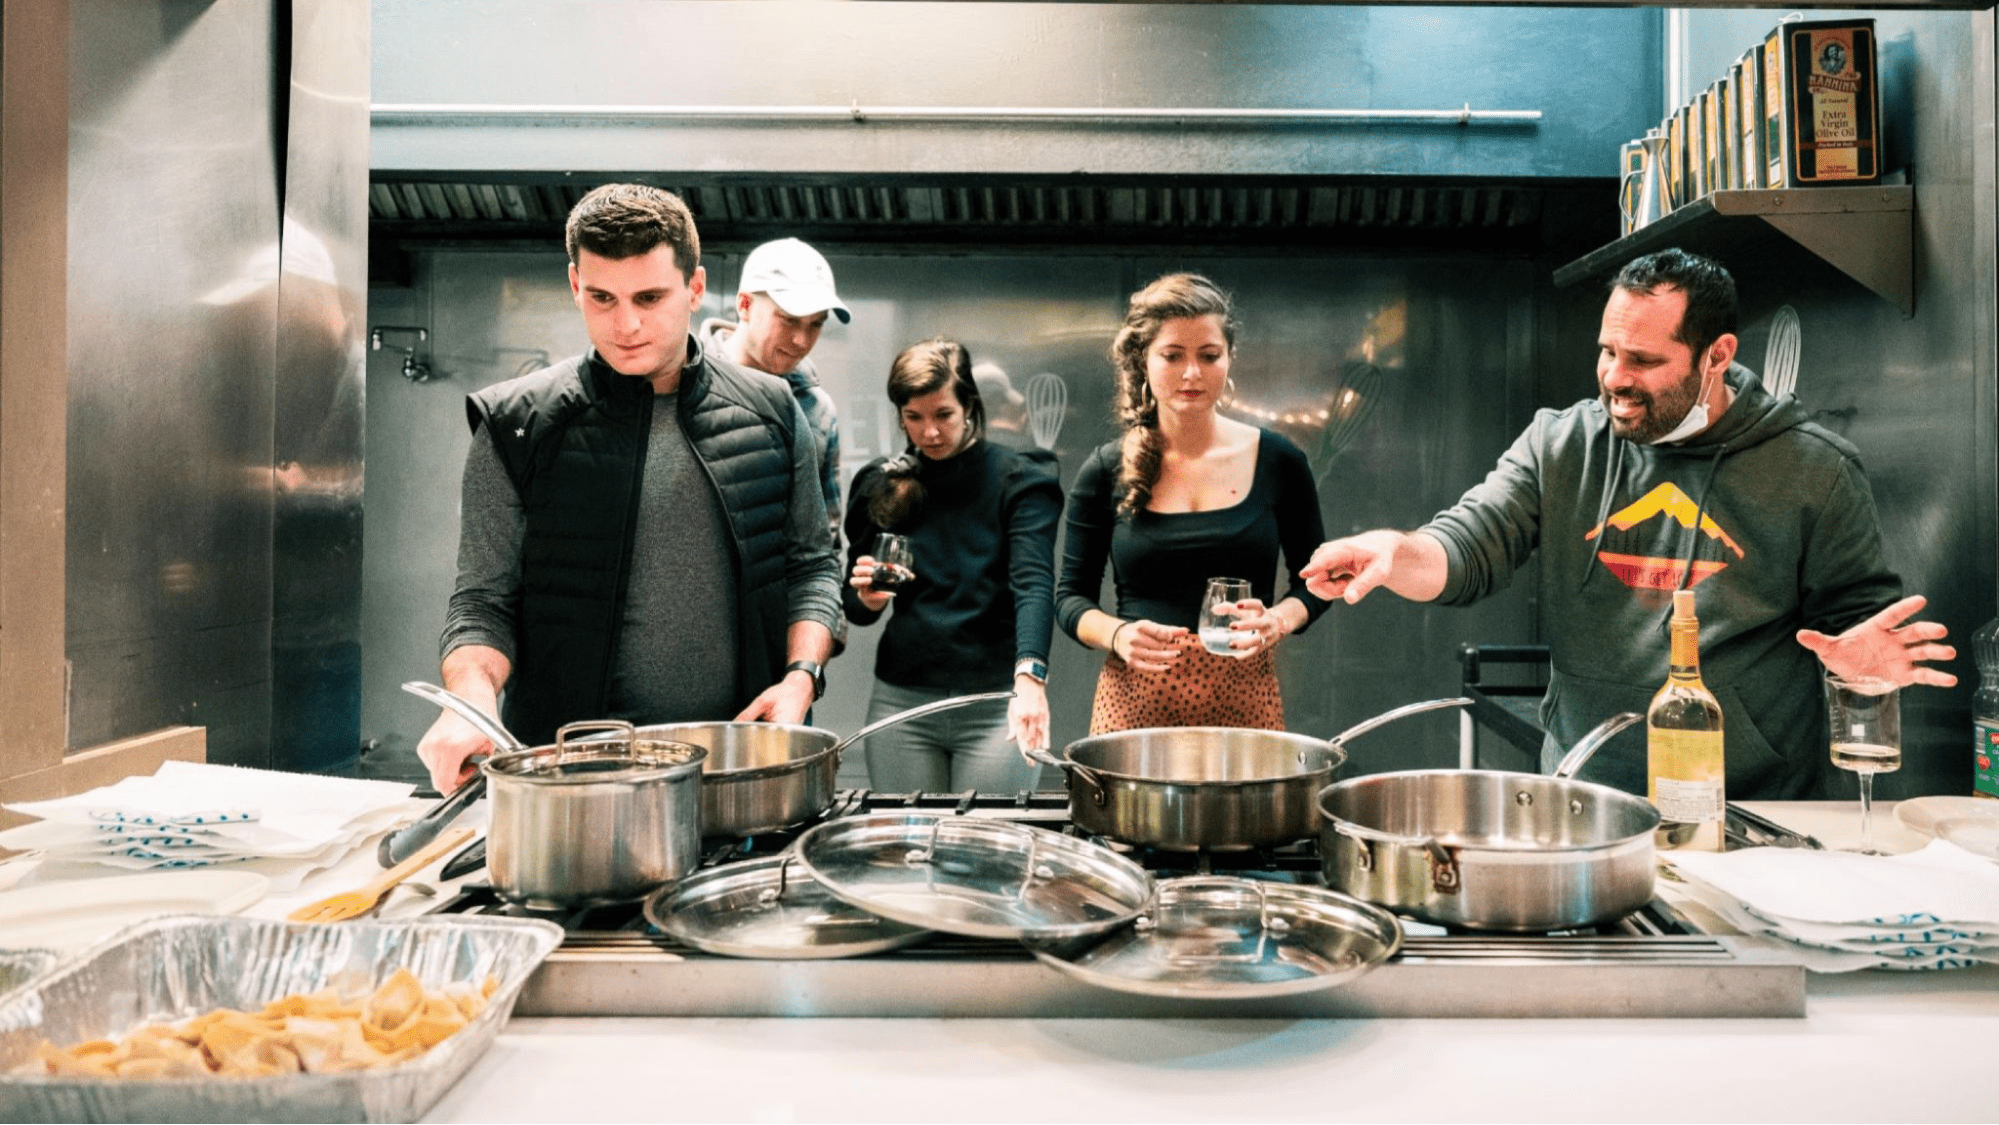 A group of people cooking